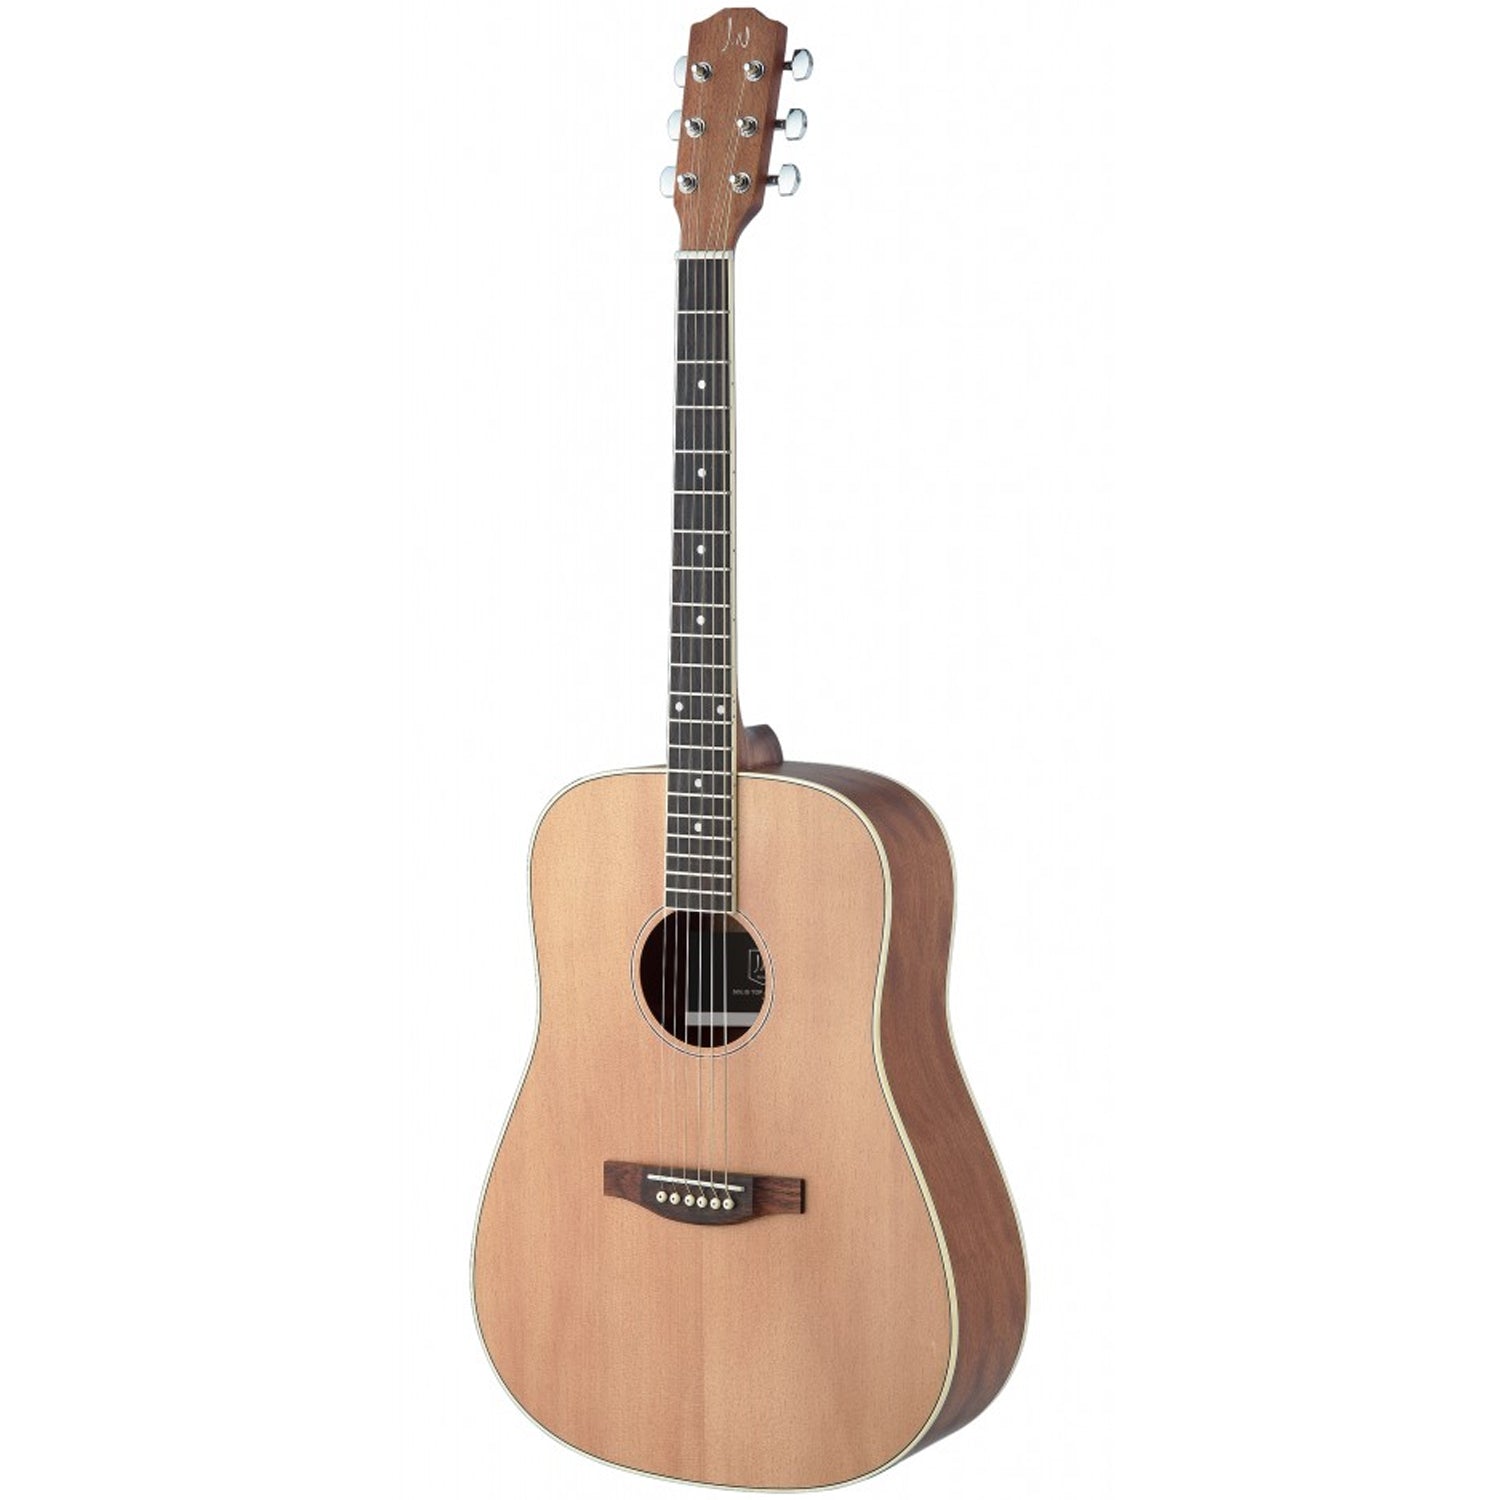 J.N.Guitars ASY-D LH Asyla Series 4/4 Dreadnought Acoustic Guitar with Solid Spruce Top Left Hand